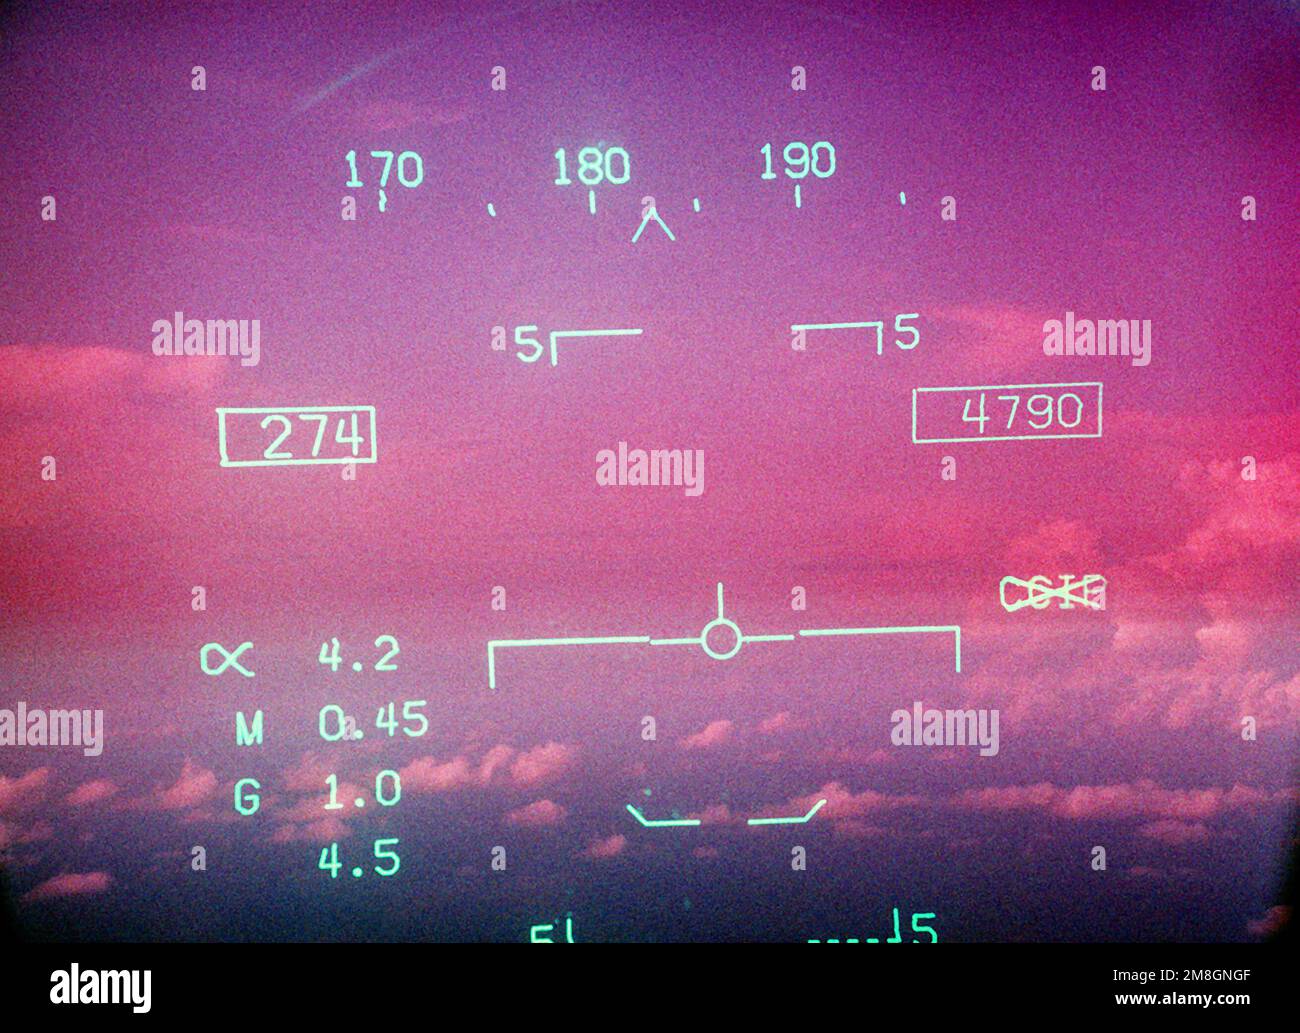 A view of one of the Heads-Up Display (HUD) screens from inside the cockpit of a Strike Fighter Squadron 136 (VFA-136) F/A-18C Hornet aircraft. Country: Unknown Stock Photo